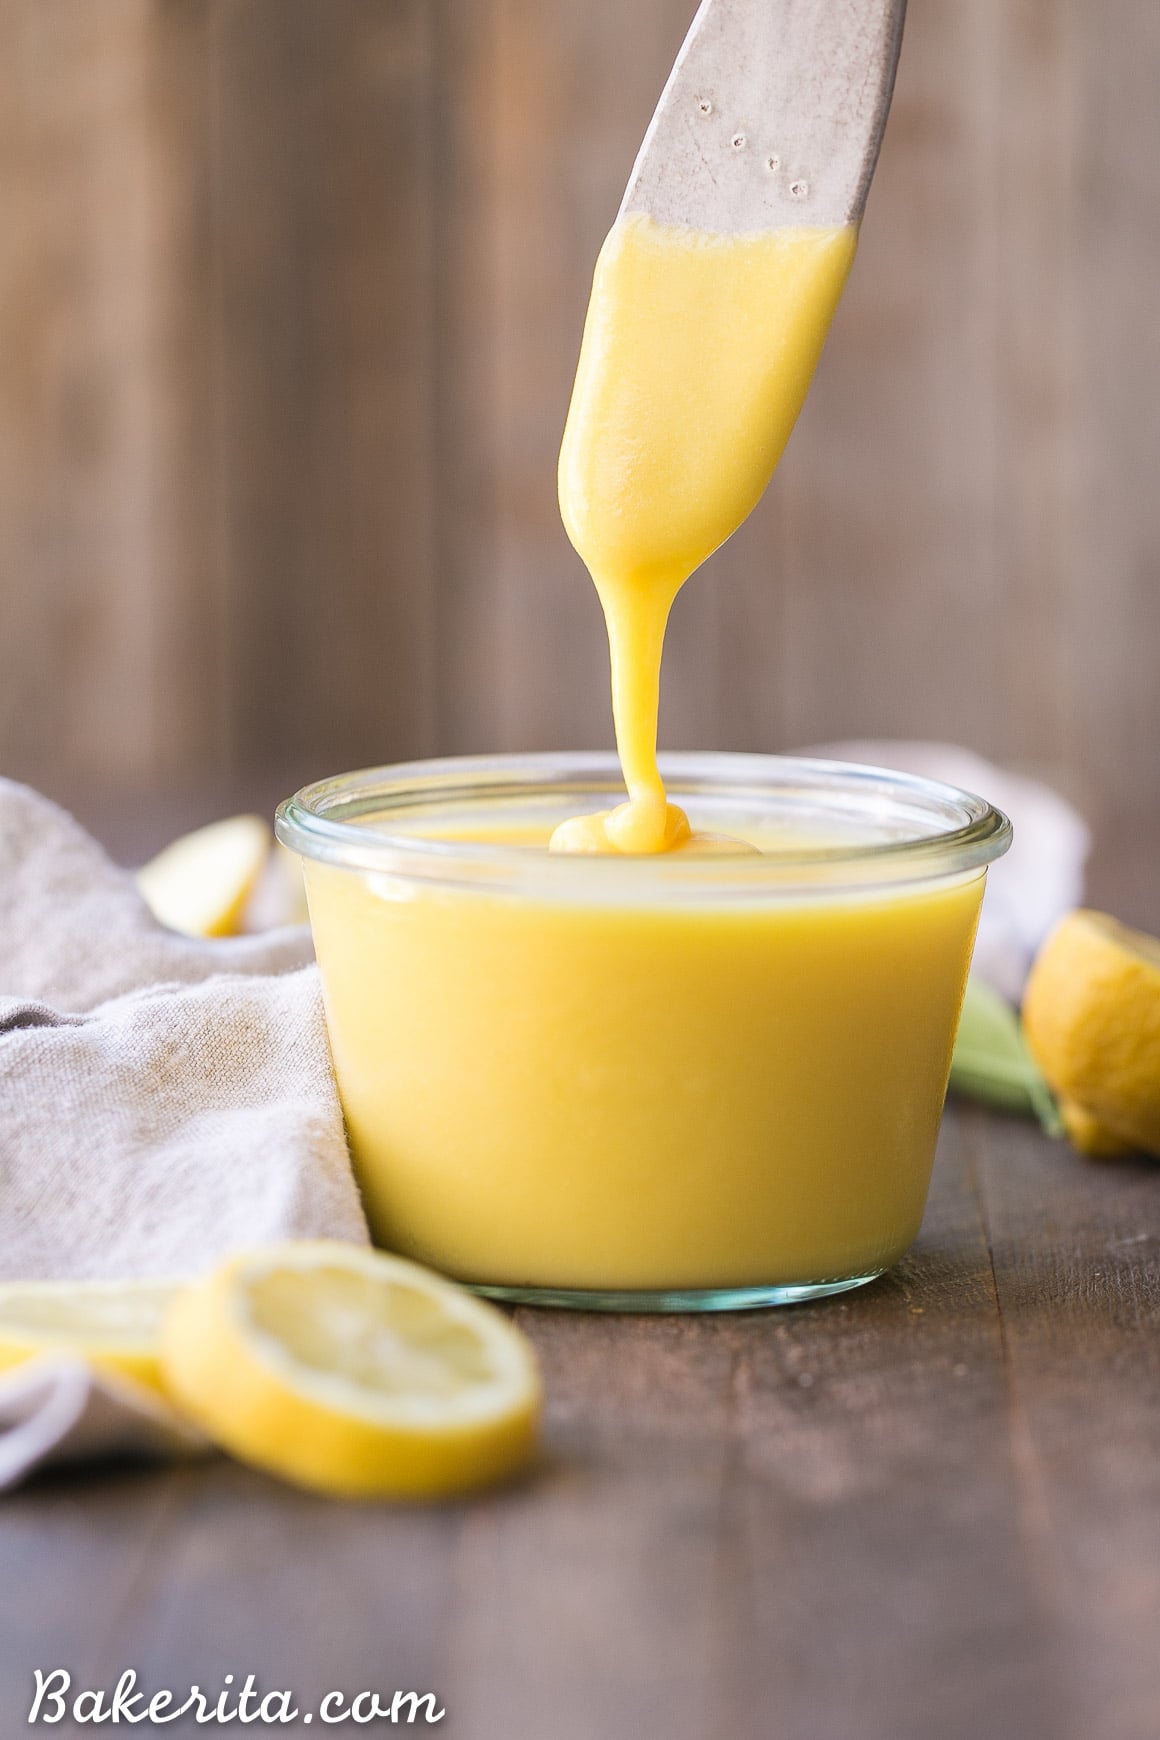 This Paleo Lemon Curd is easy to make, super silky, and perfectly tart. It's a refined sugar free honey-sweetened recipe made with just five ingredients. It's perfect to drizzle on pancakes or waffles, swirl into your yogurt, use it in baked goods, or just eat it with a spoon!